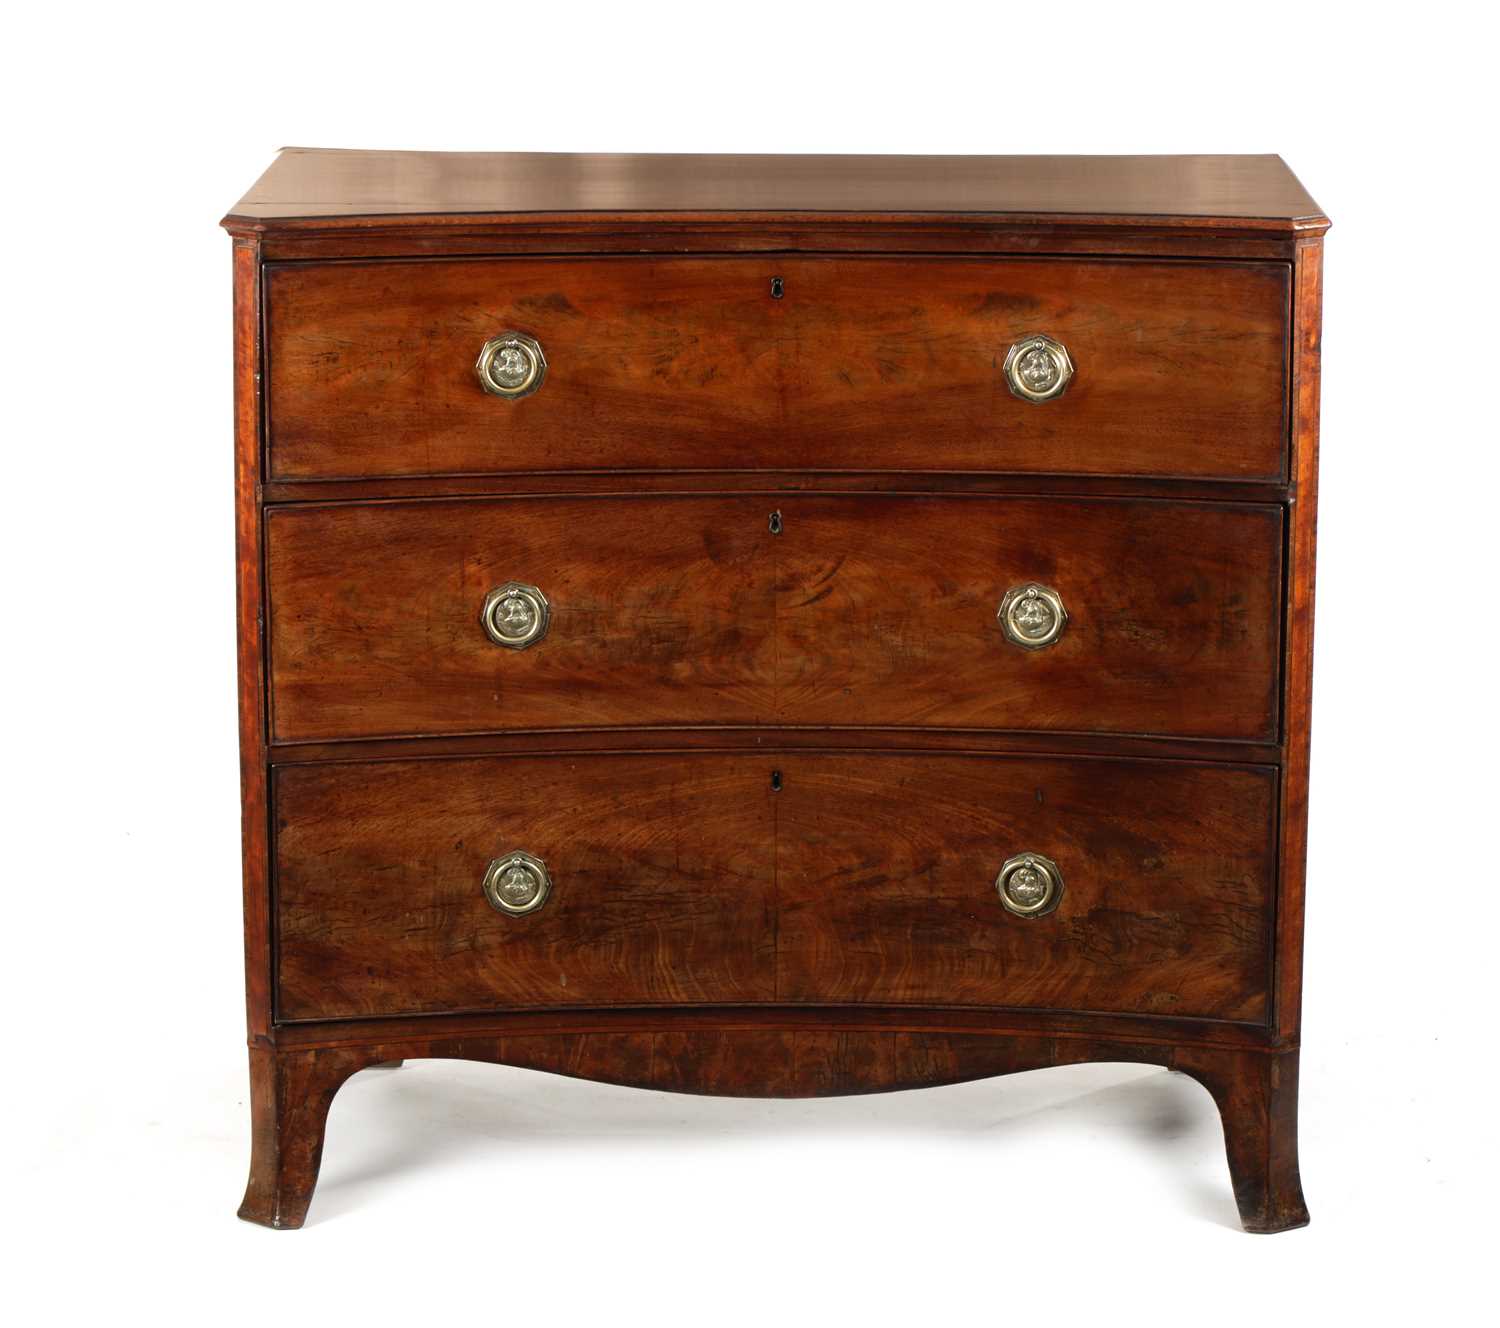 AN UNUSUAL LATE GEORGIAN FIGURED MAHOGANY INVERTED BOW FRONT CHEST OF DRAWERS